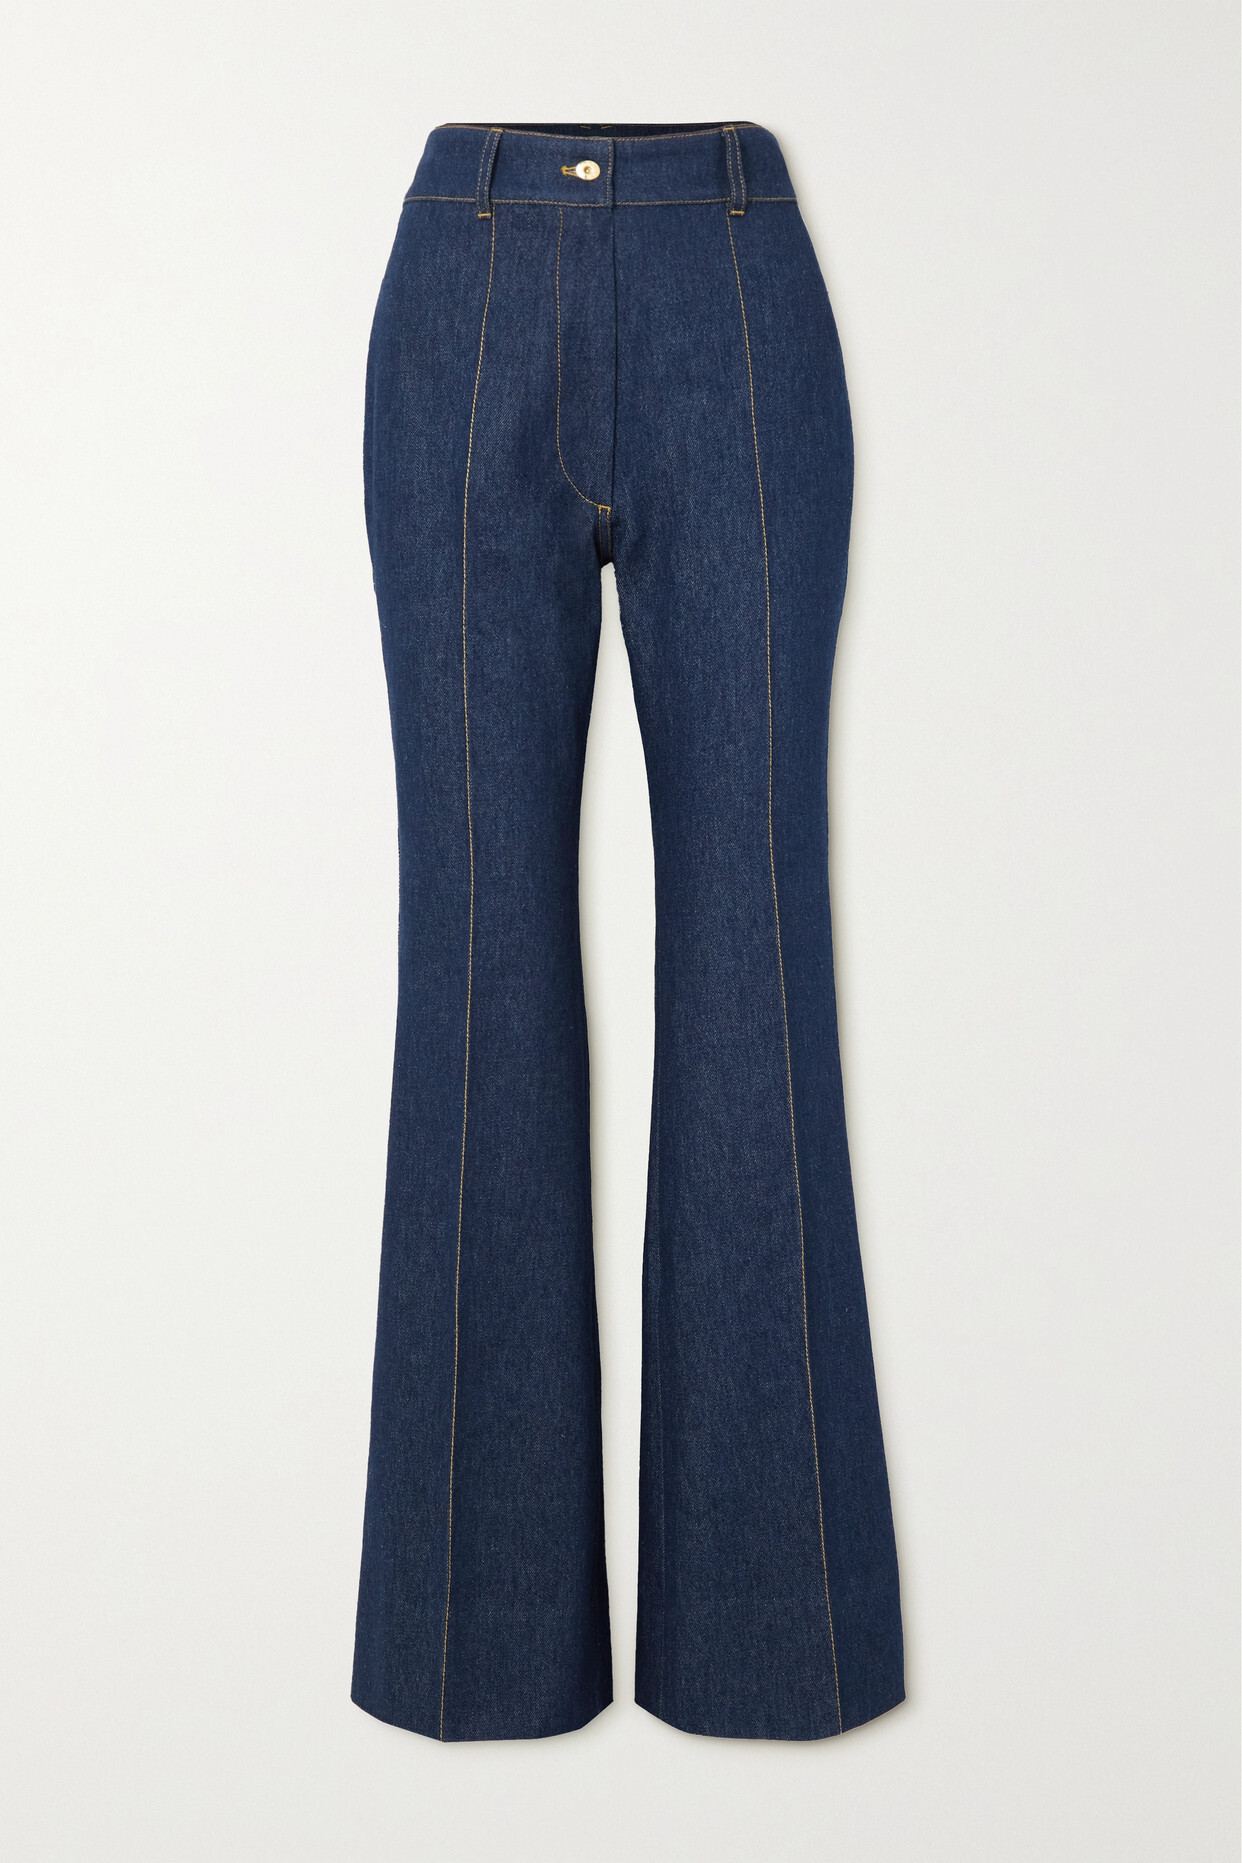 Patou - High-rise Flared Jeans - Blue